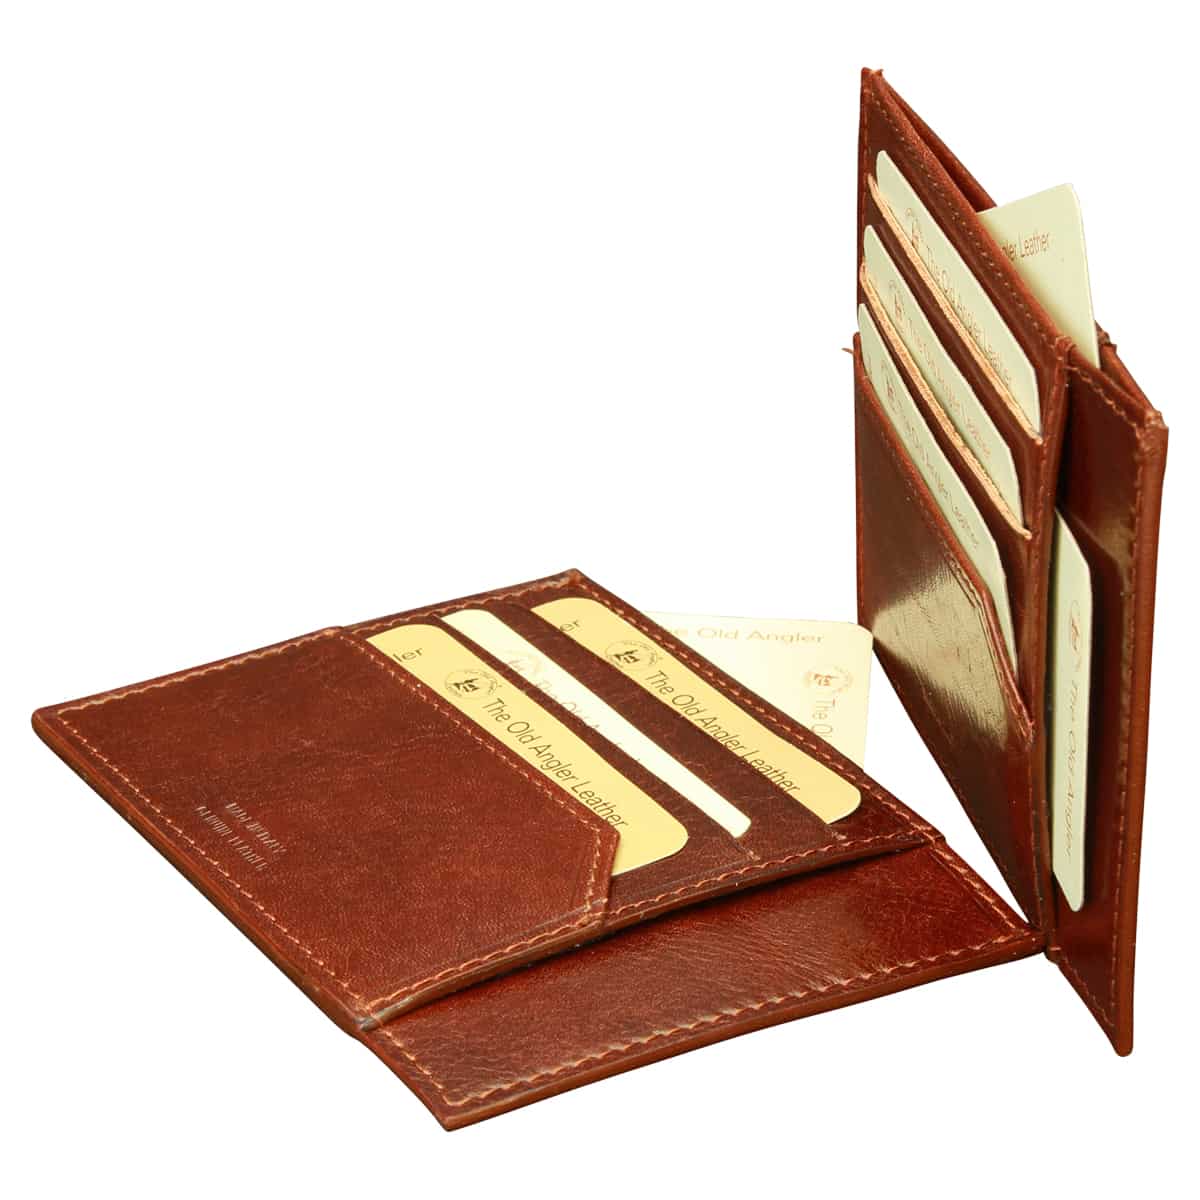 Italian leather credit card holder - Brown | 804005MA | EURO | Old Angler Firenze